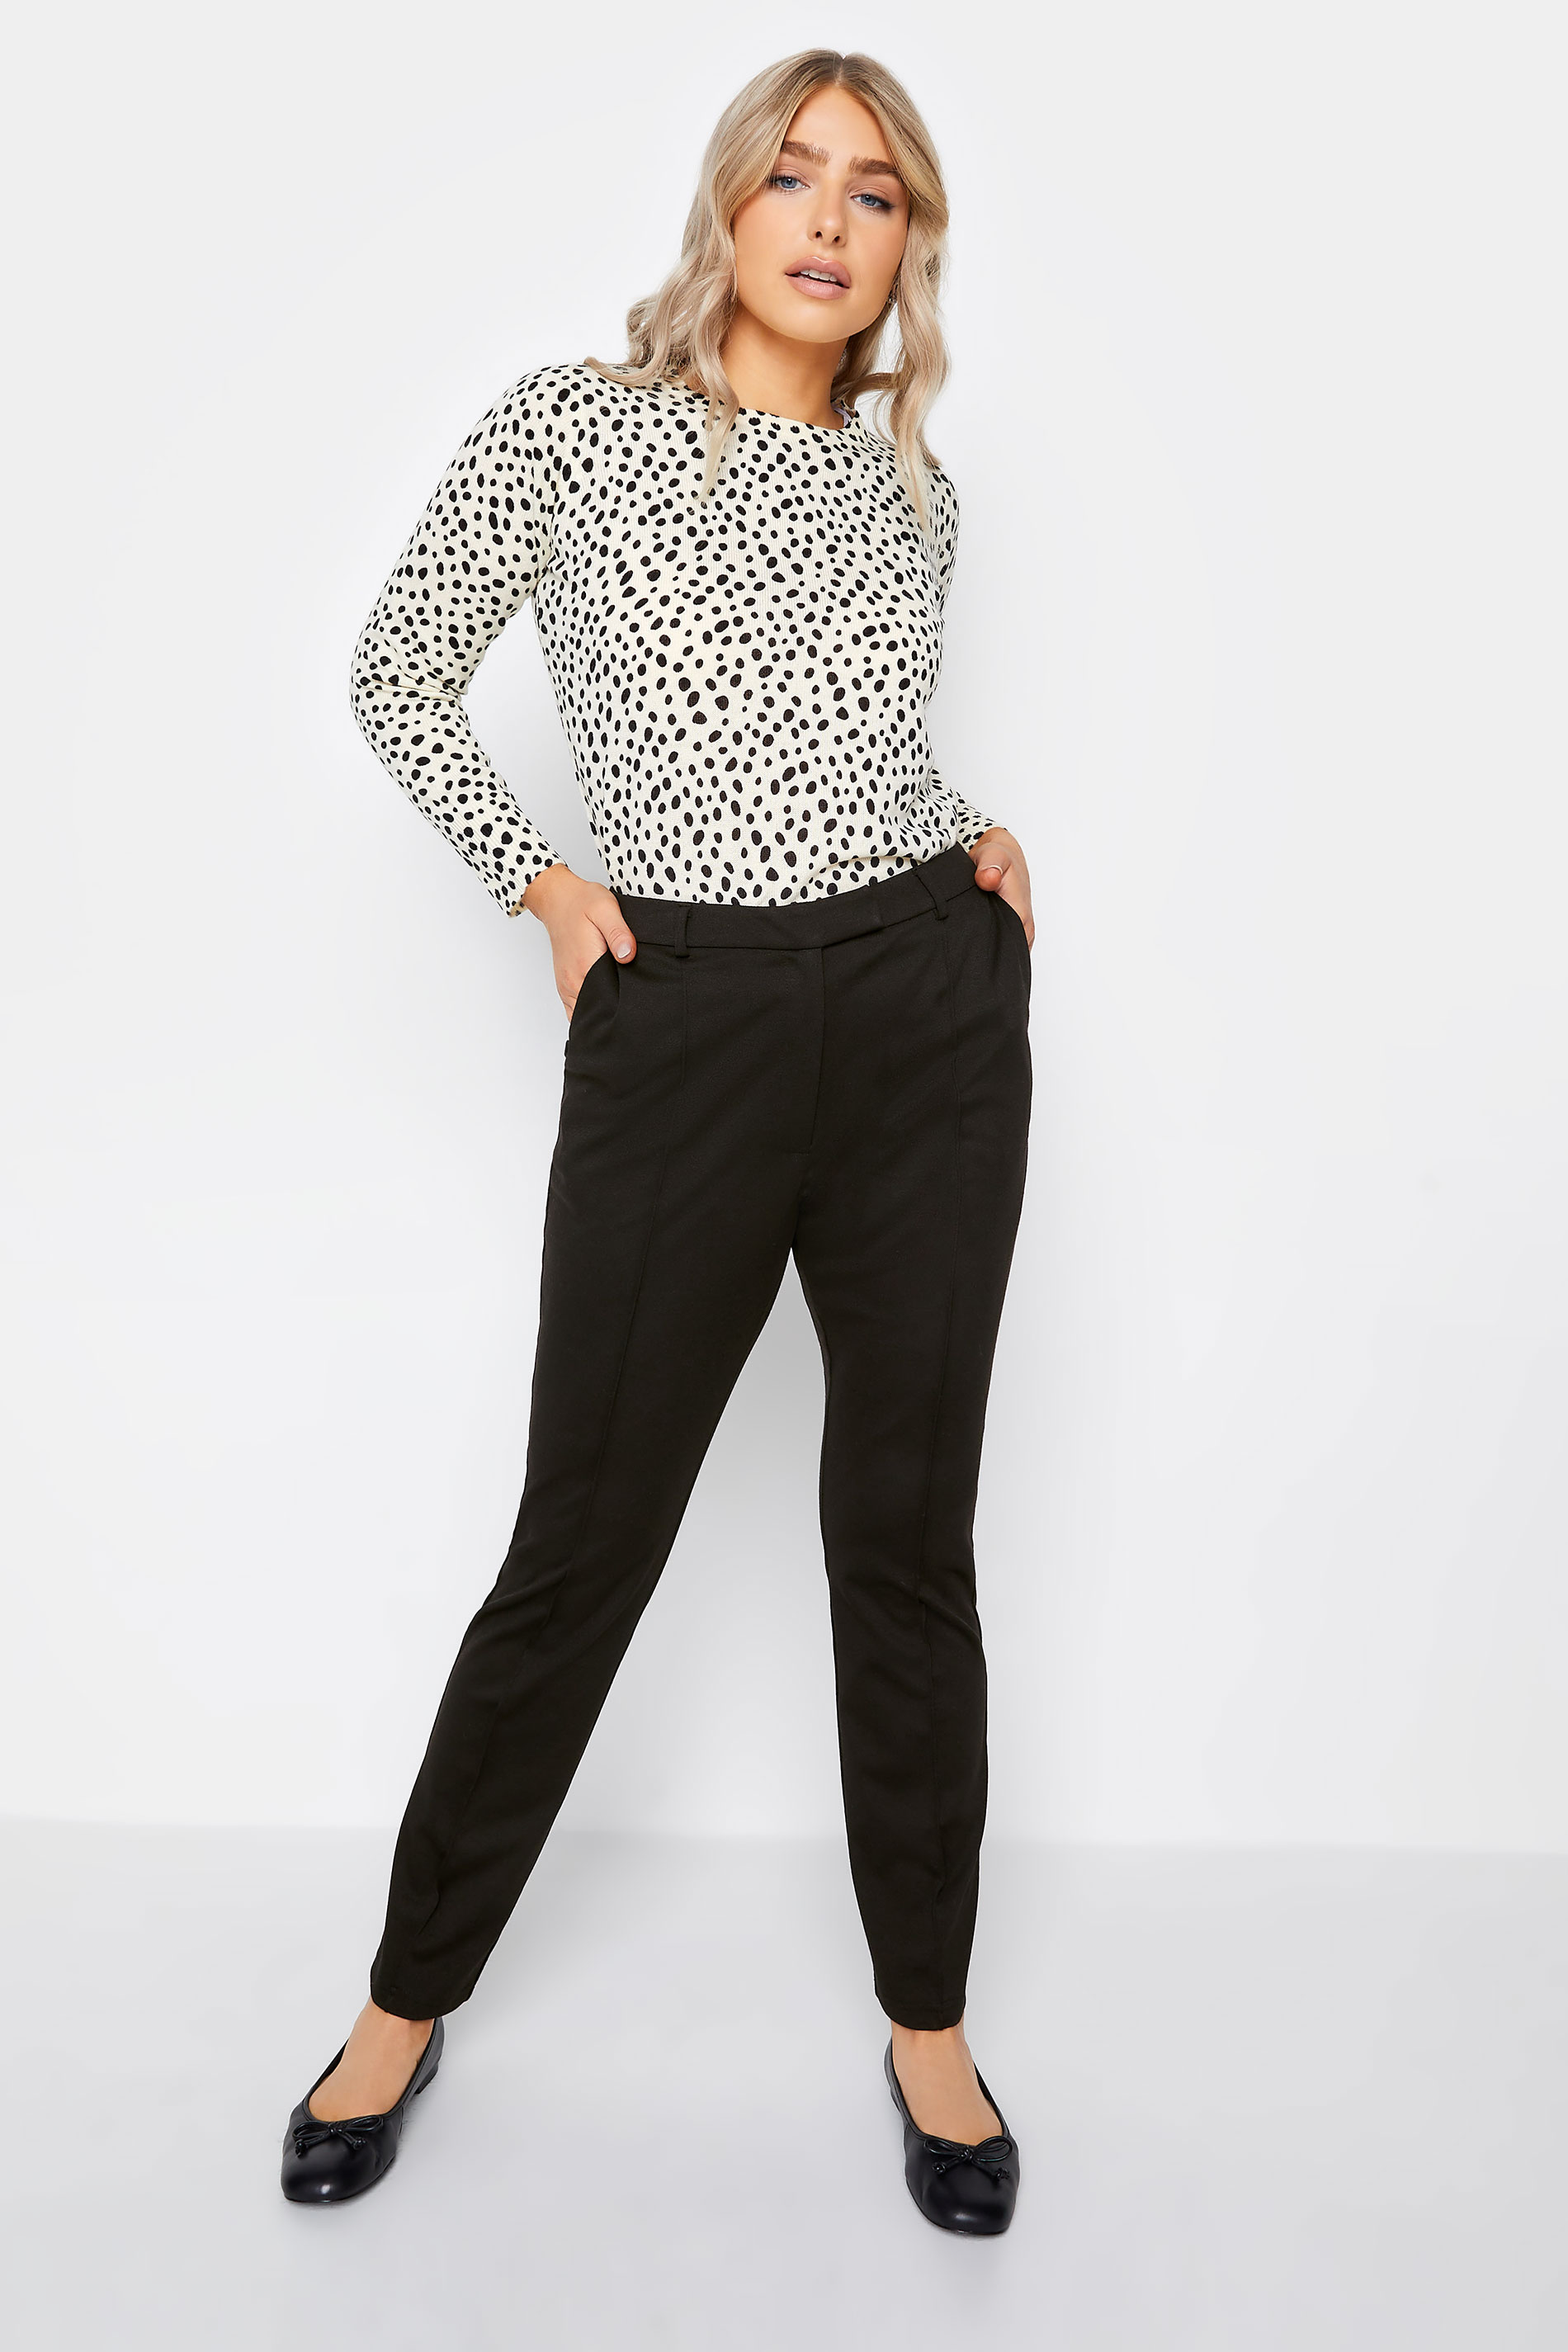 Buy Black Ponte Slim Leg Trousers from Next Luxembourg